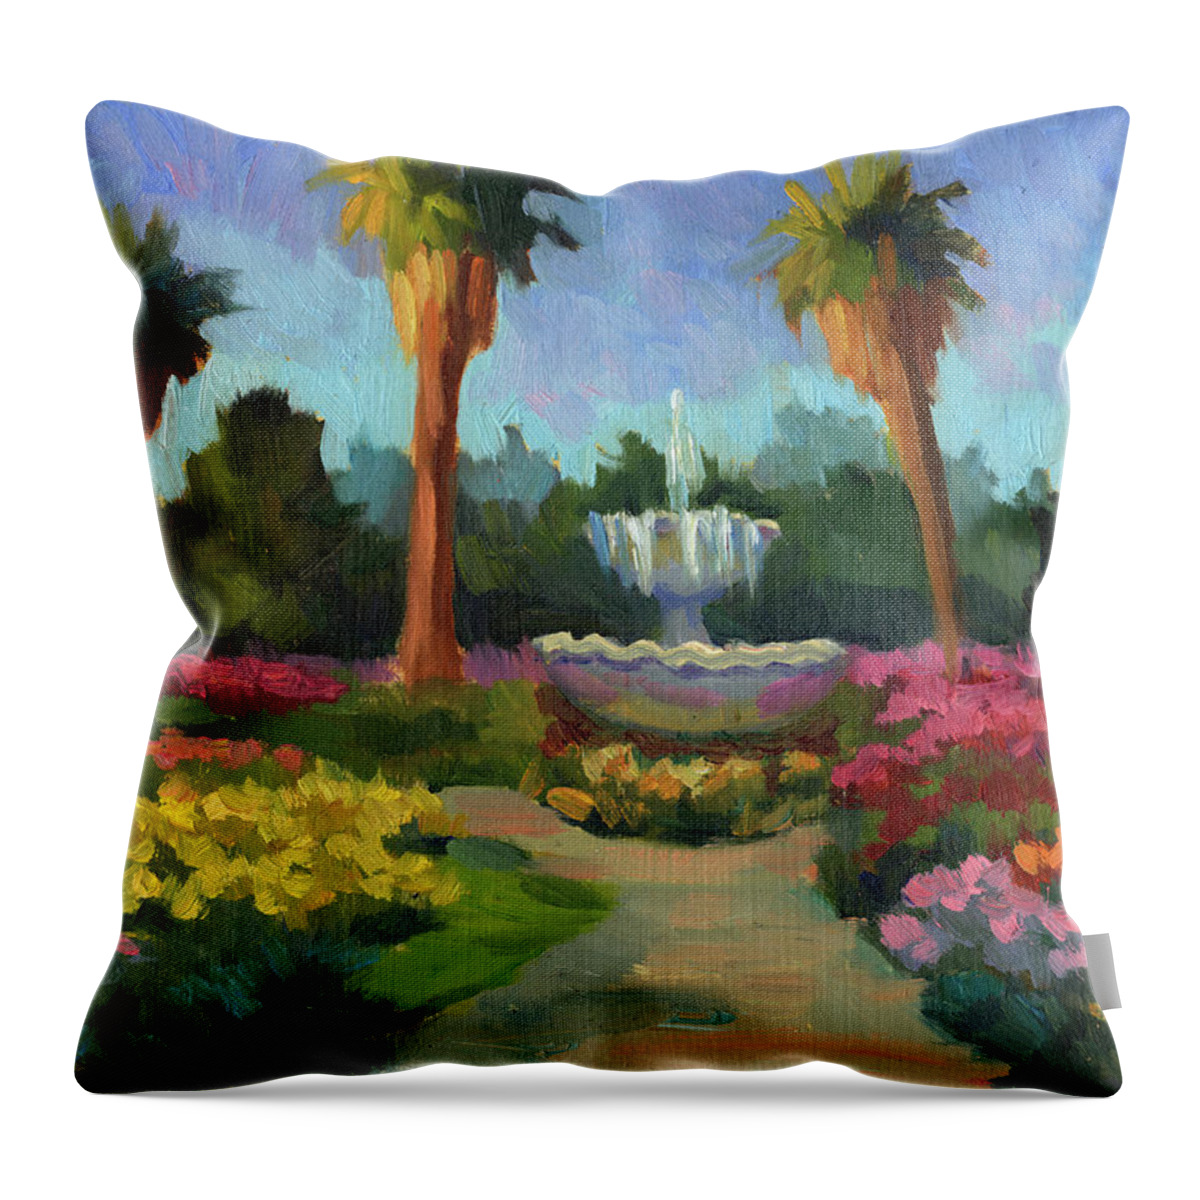 Rose Garden Throw Pillow featuring the painting Rose Garden by Diane McClary